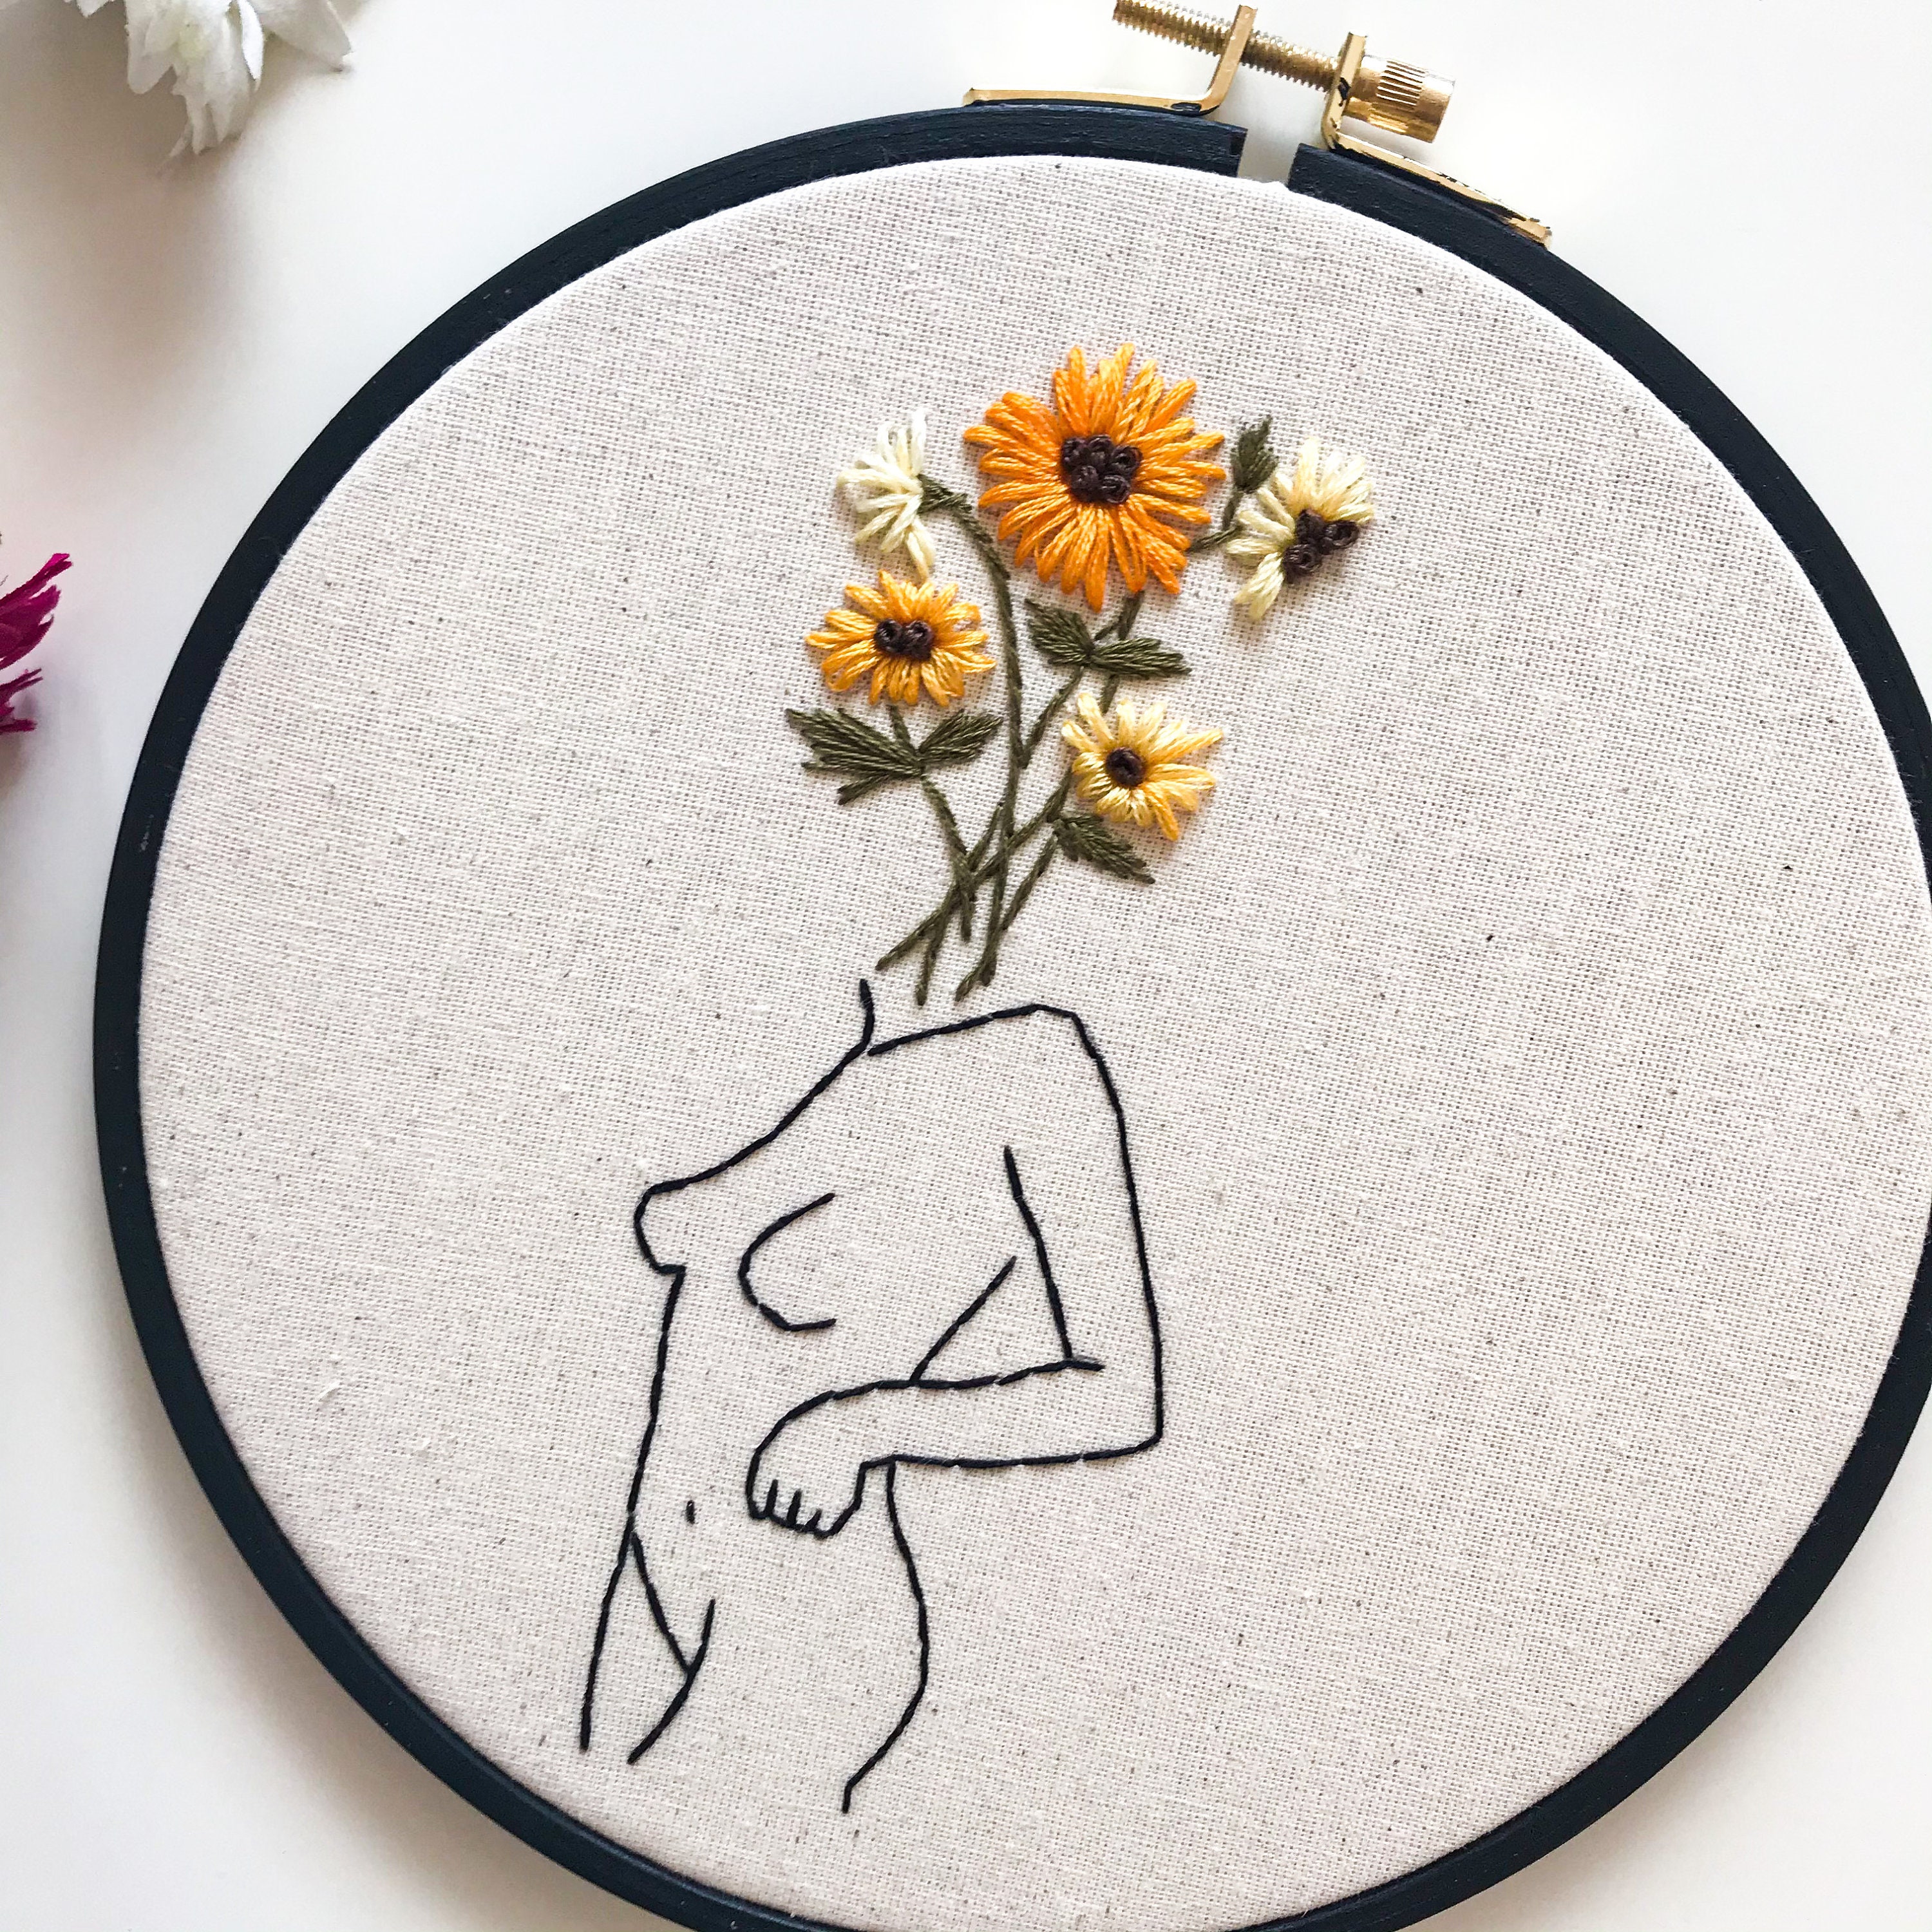 Modern Line Art Embroidery Kit. Floral Girl Embroidery. Feminist Hoop Art.  Modern Needle Craft Kit. Hand Embroidery Kit or Finished Product. 